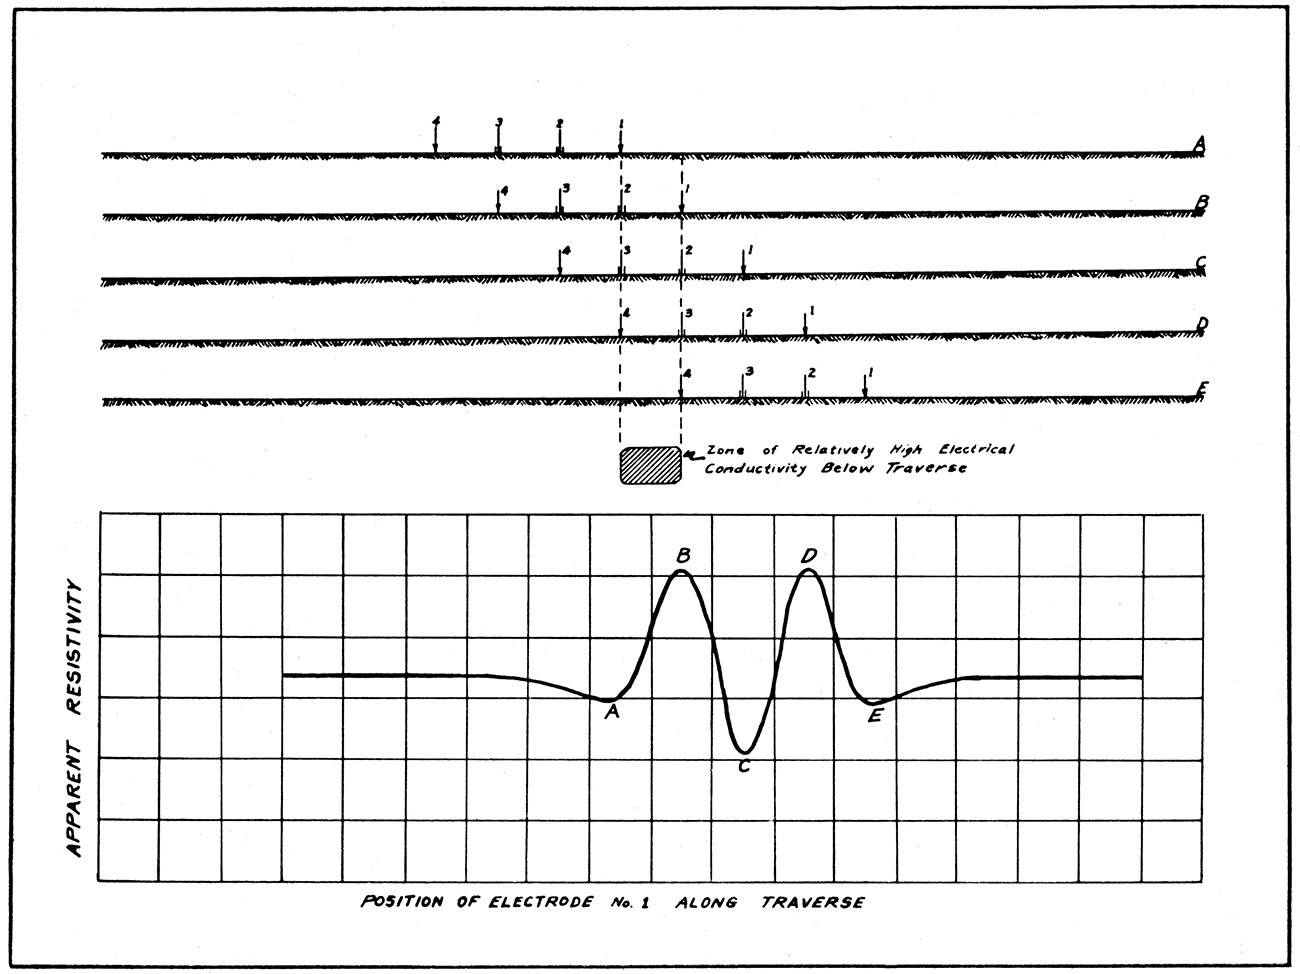 Anomaly caused by electrically conductive zone crossed by resistivity traverse.